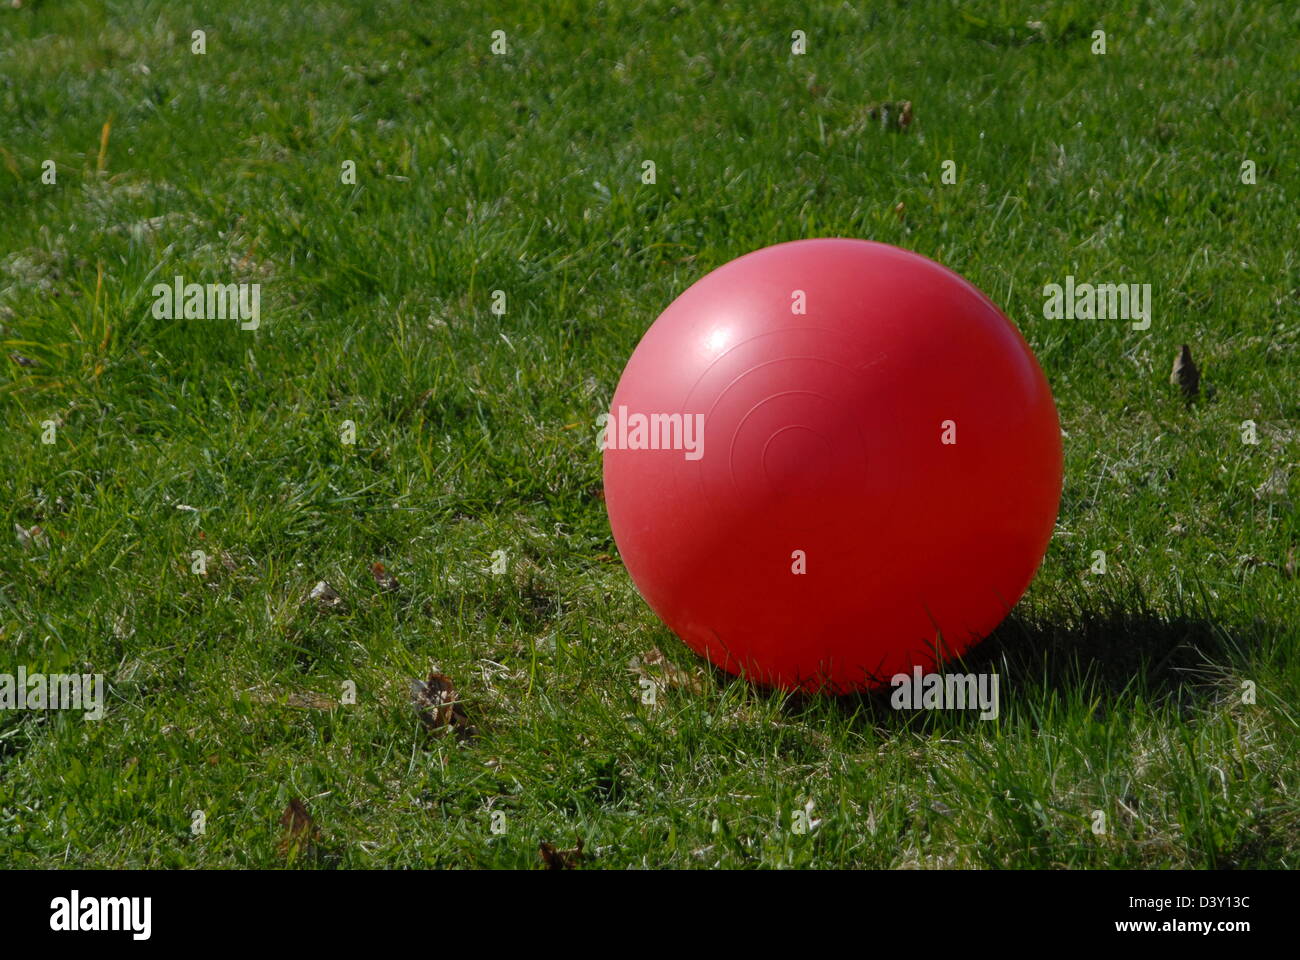 Red ball in green grass. Stock Photo